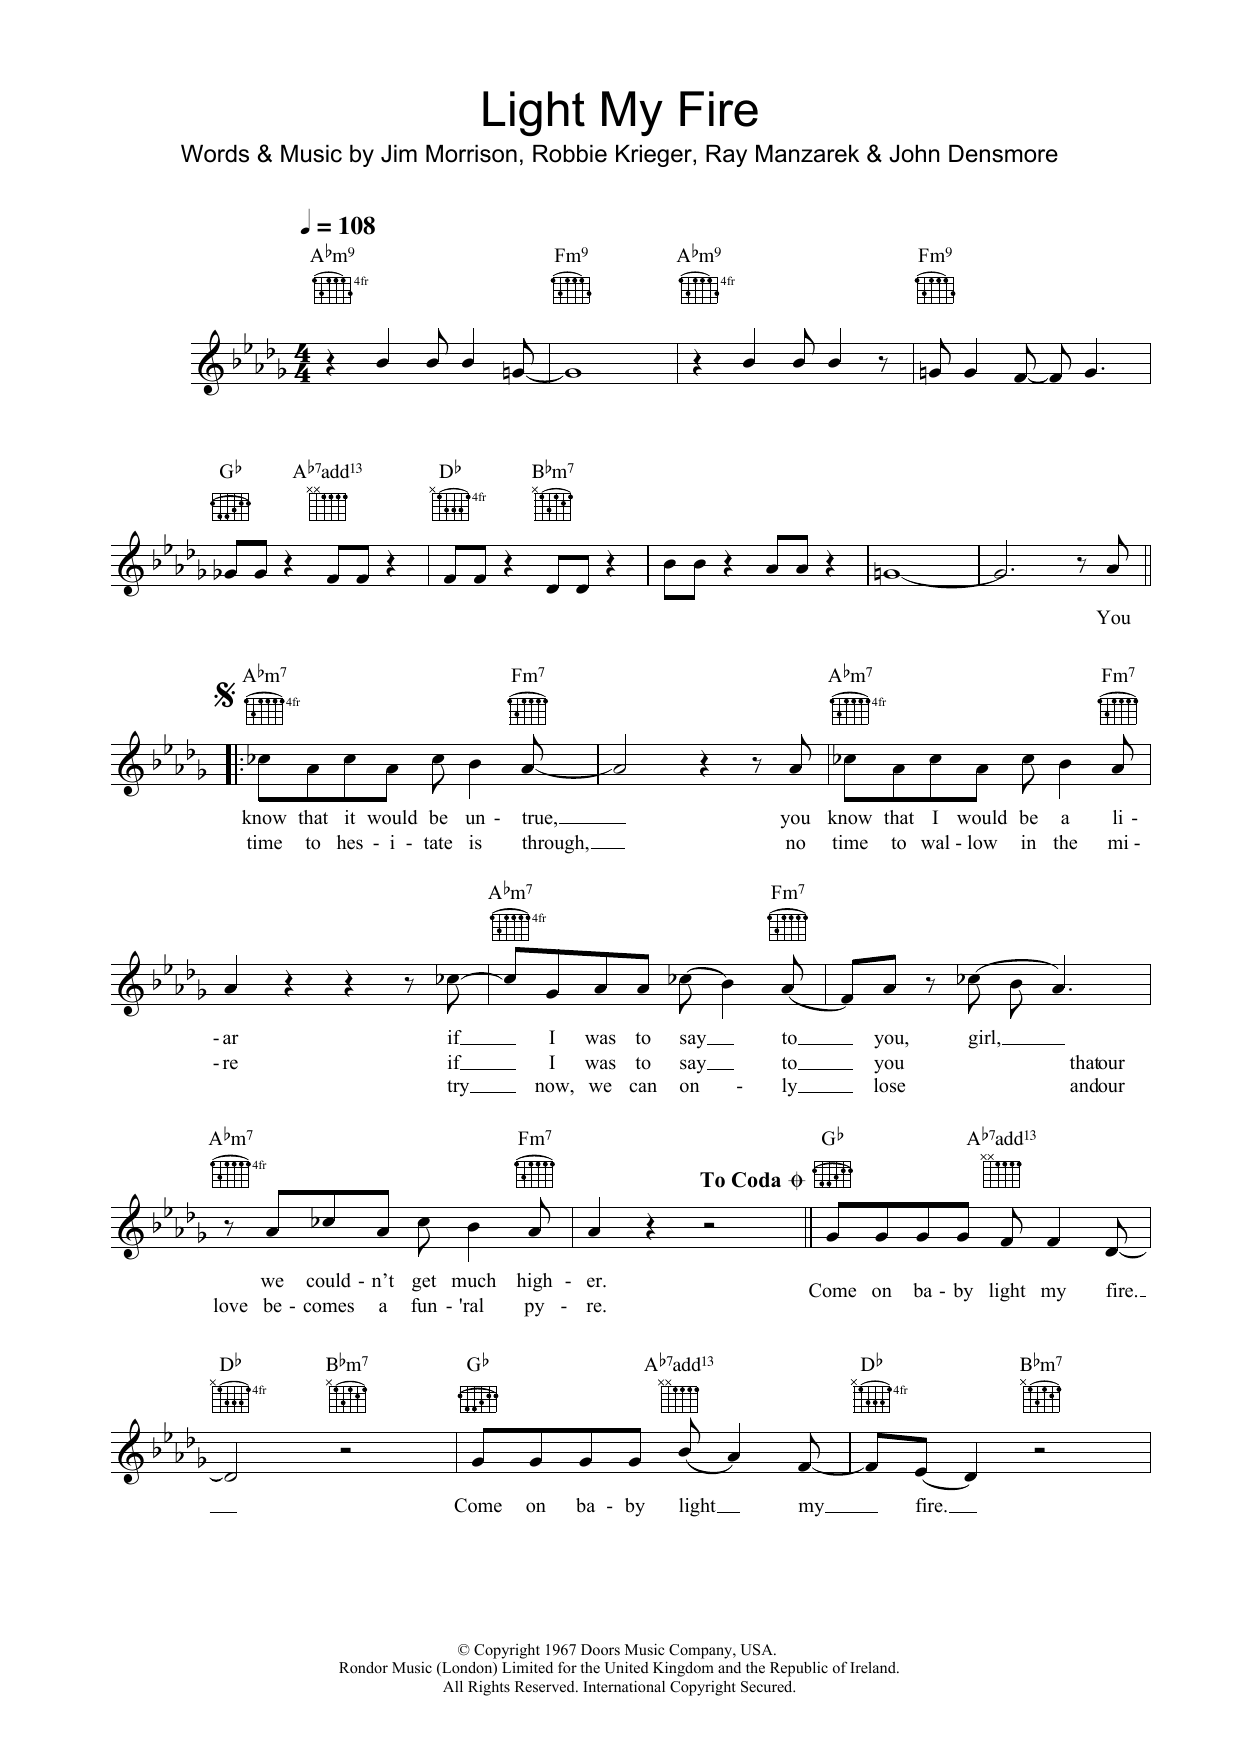 Will Young Light My Fire sheet music notes and chords. Download Printable PDF.